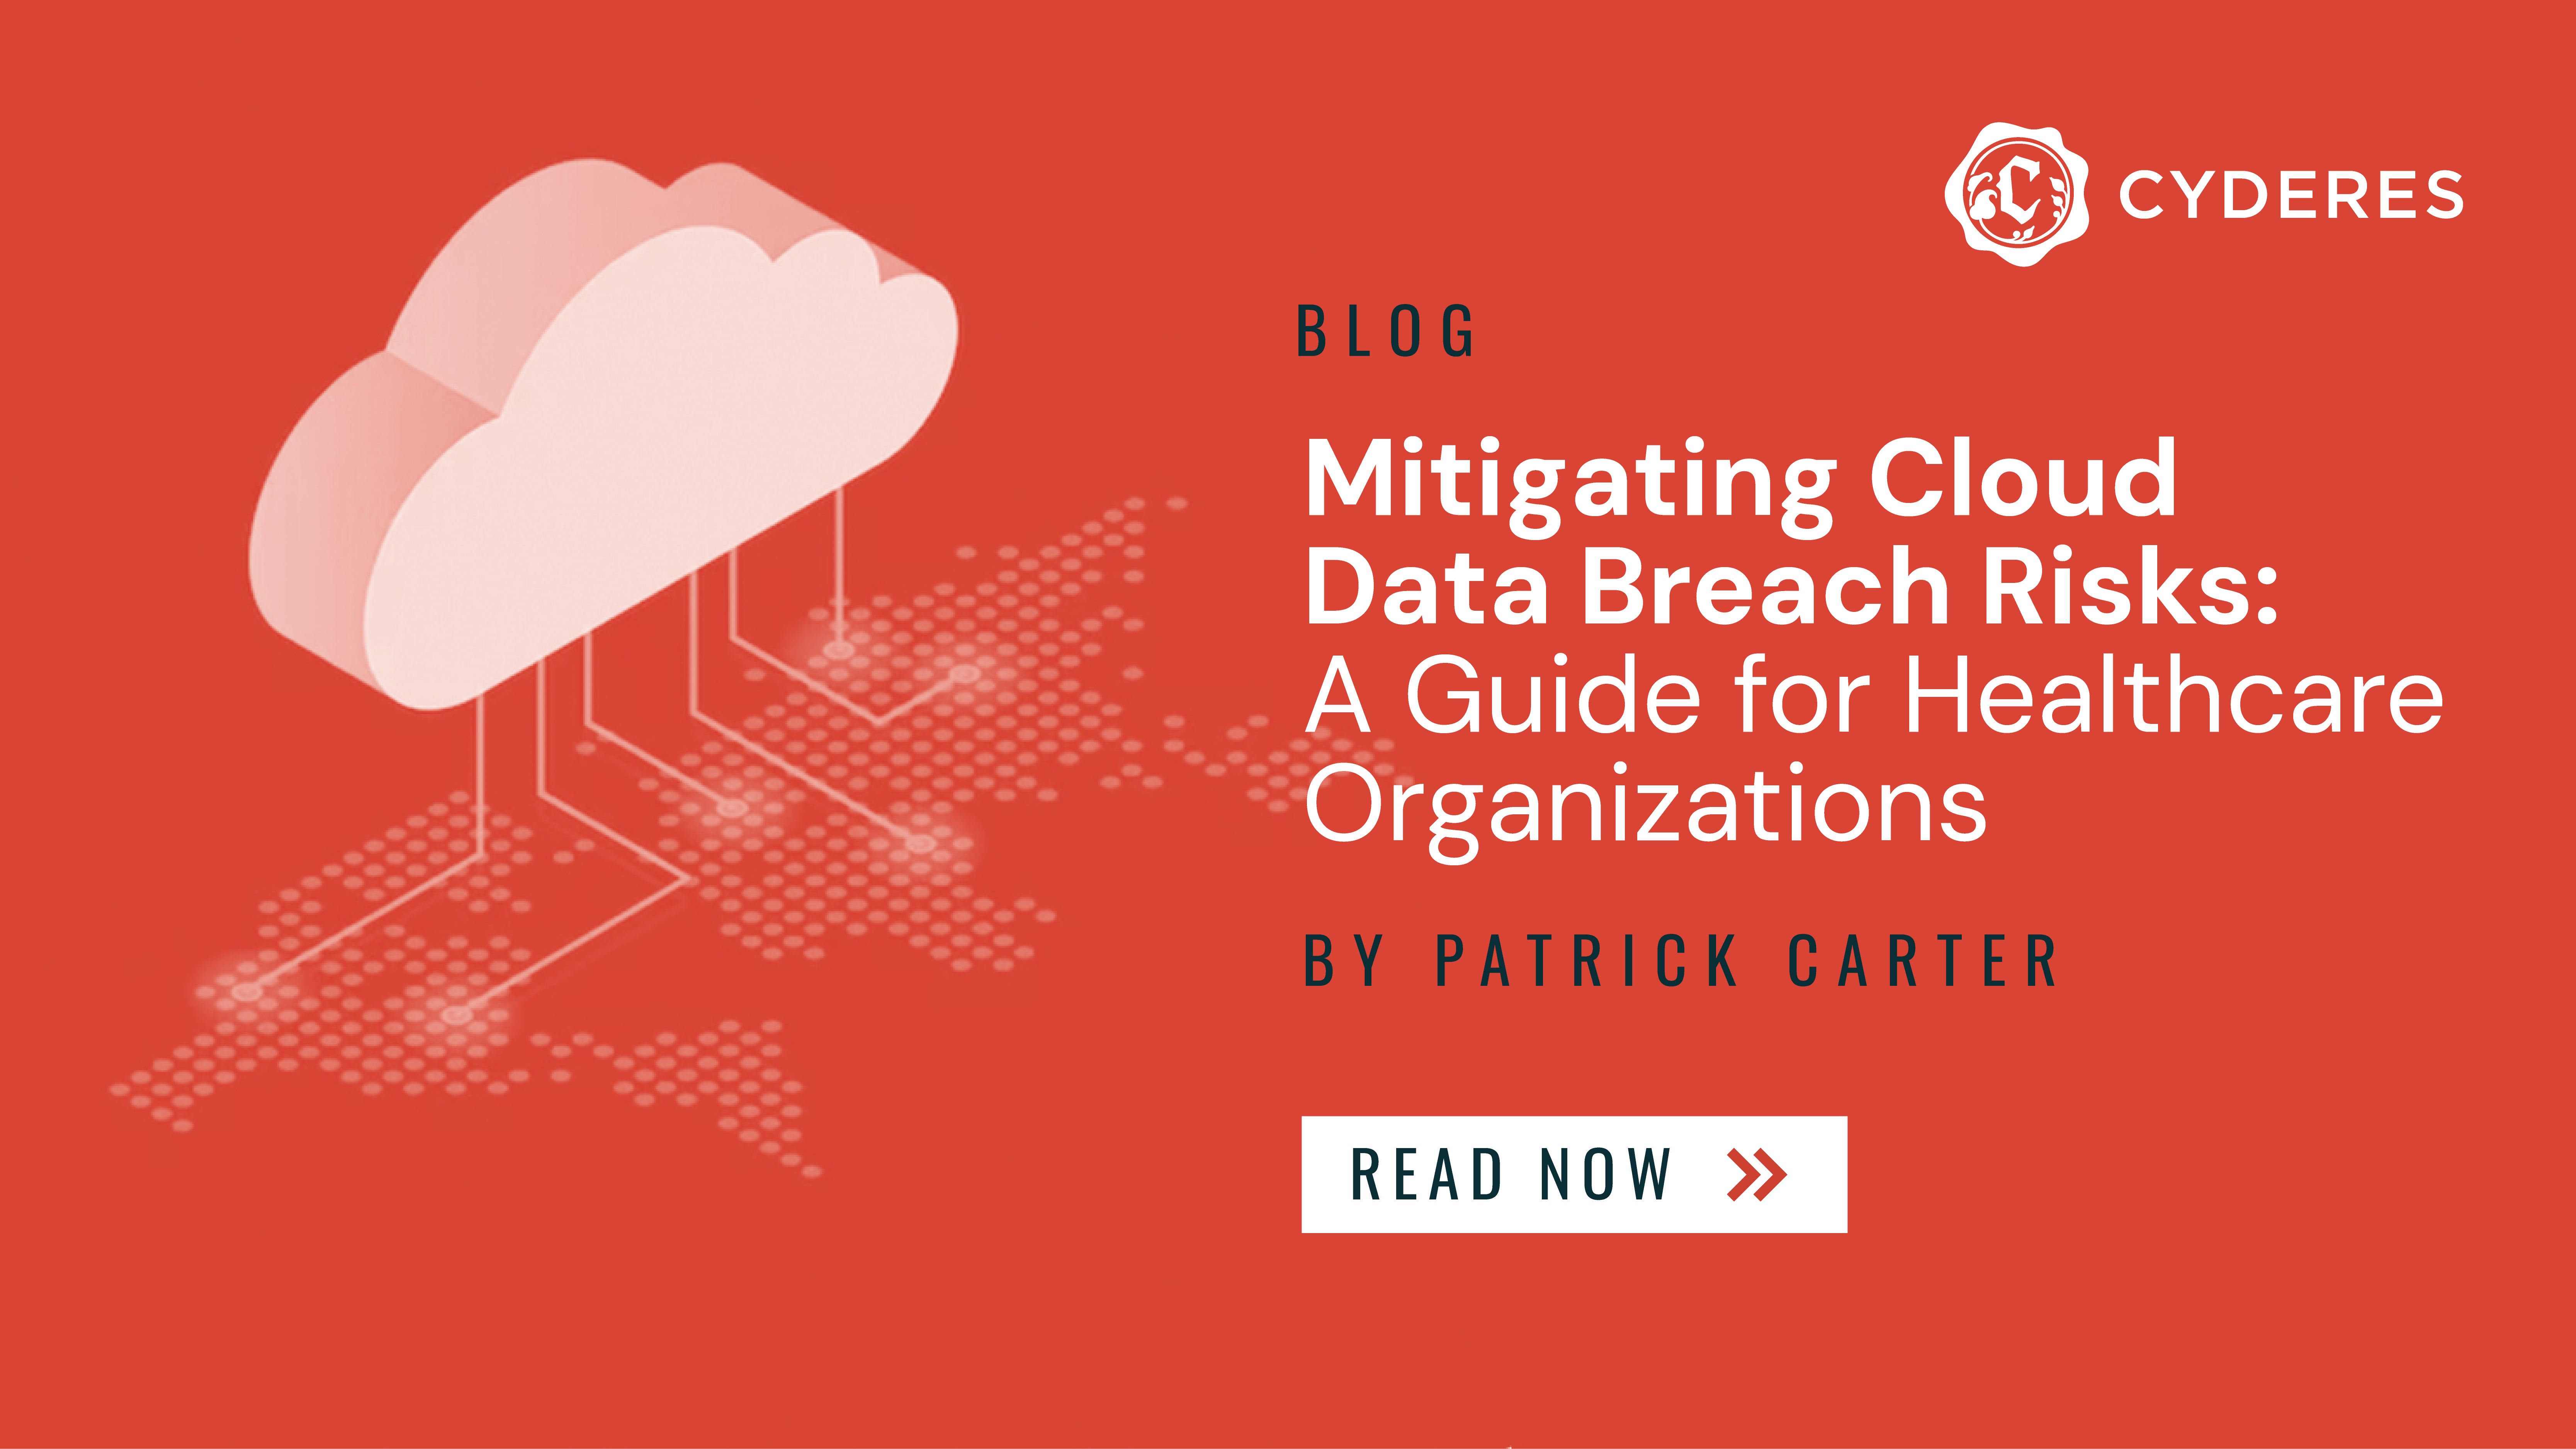 Mitigating Cloud Data Breach Risks: A Guide for Healthcare Organizations